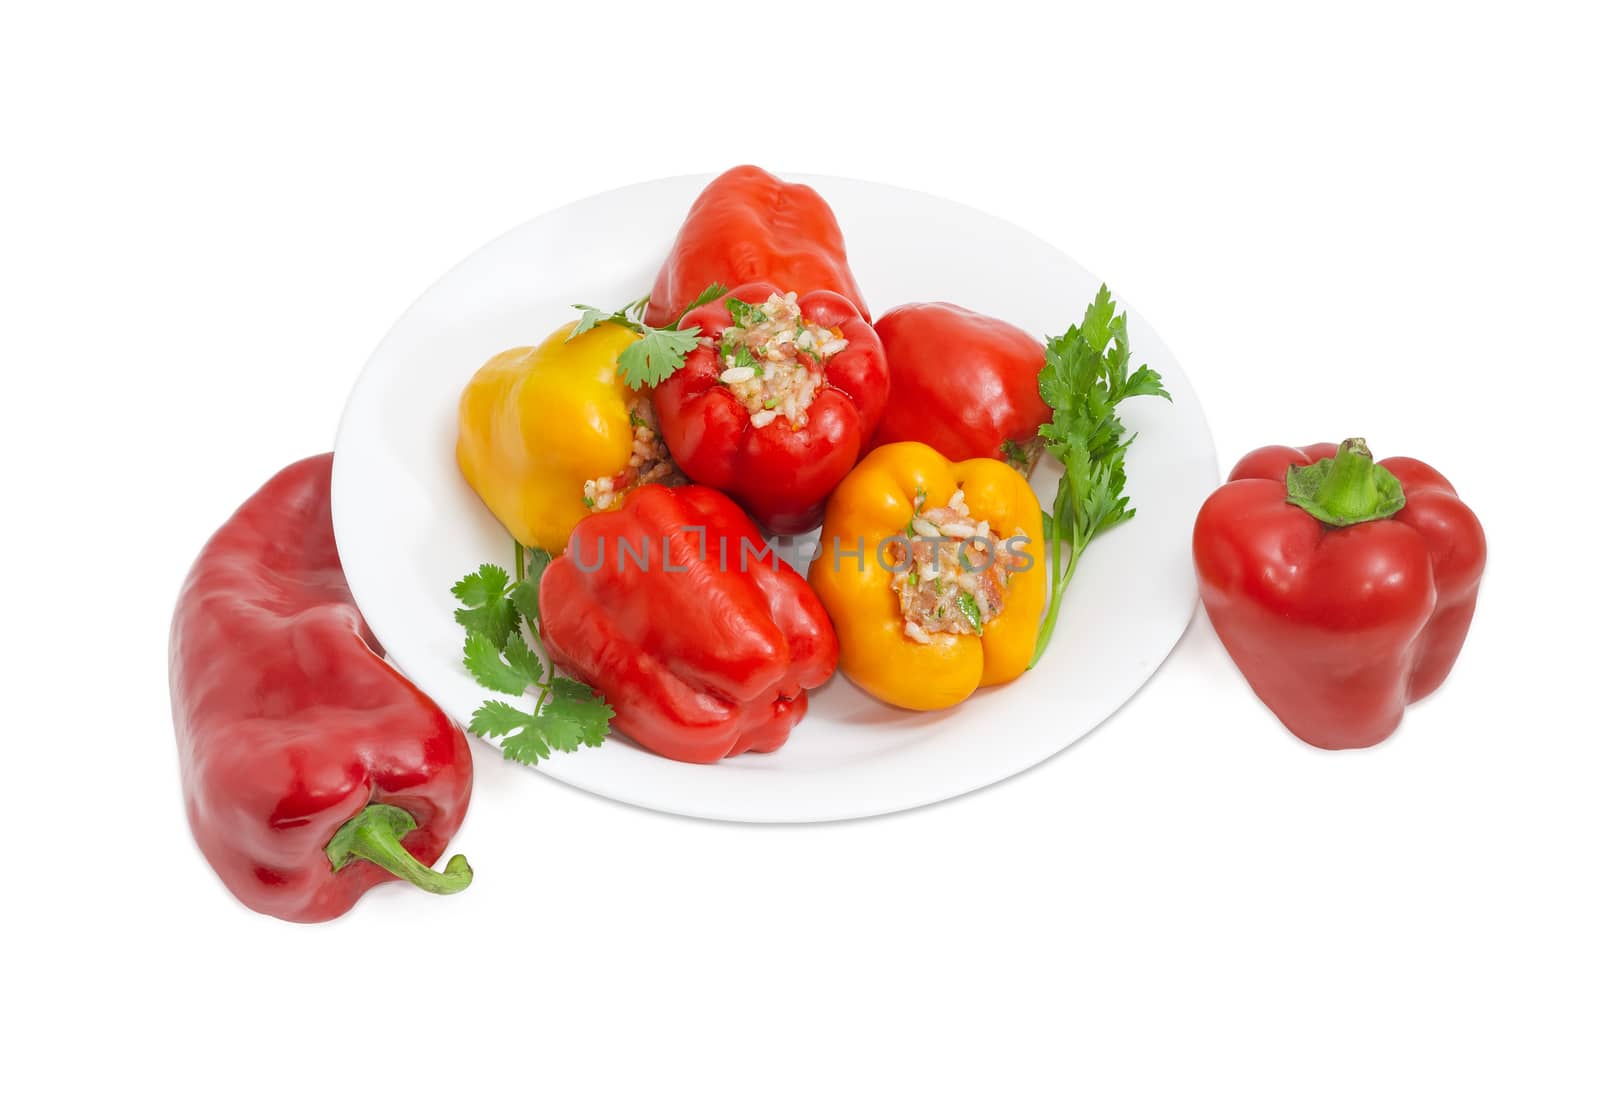 Cooked stuffed red and yellow bell peppers and twigs of parsley and cilantro on a white dish and two uncooked red bell peppers separately beside on a light background
